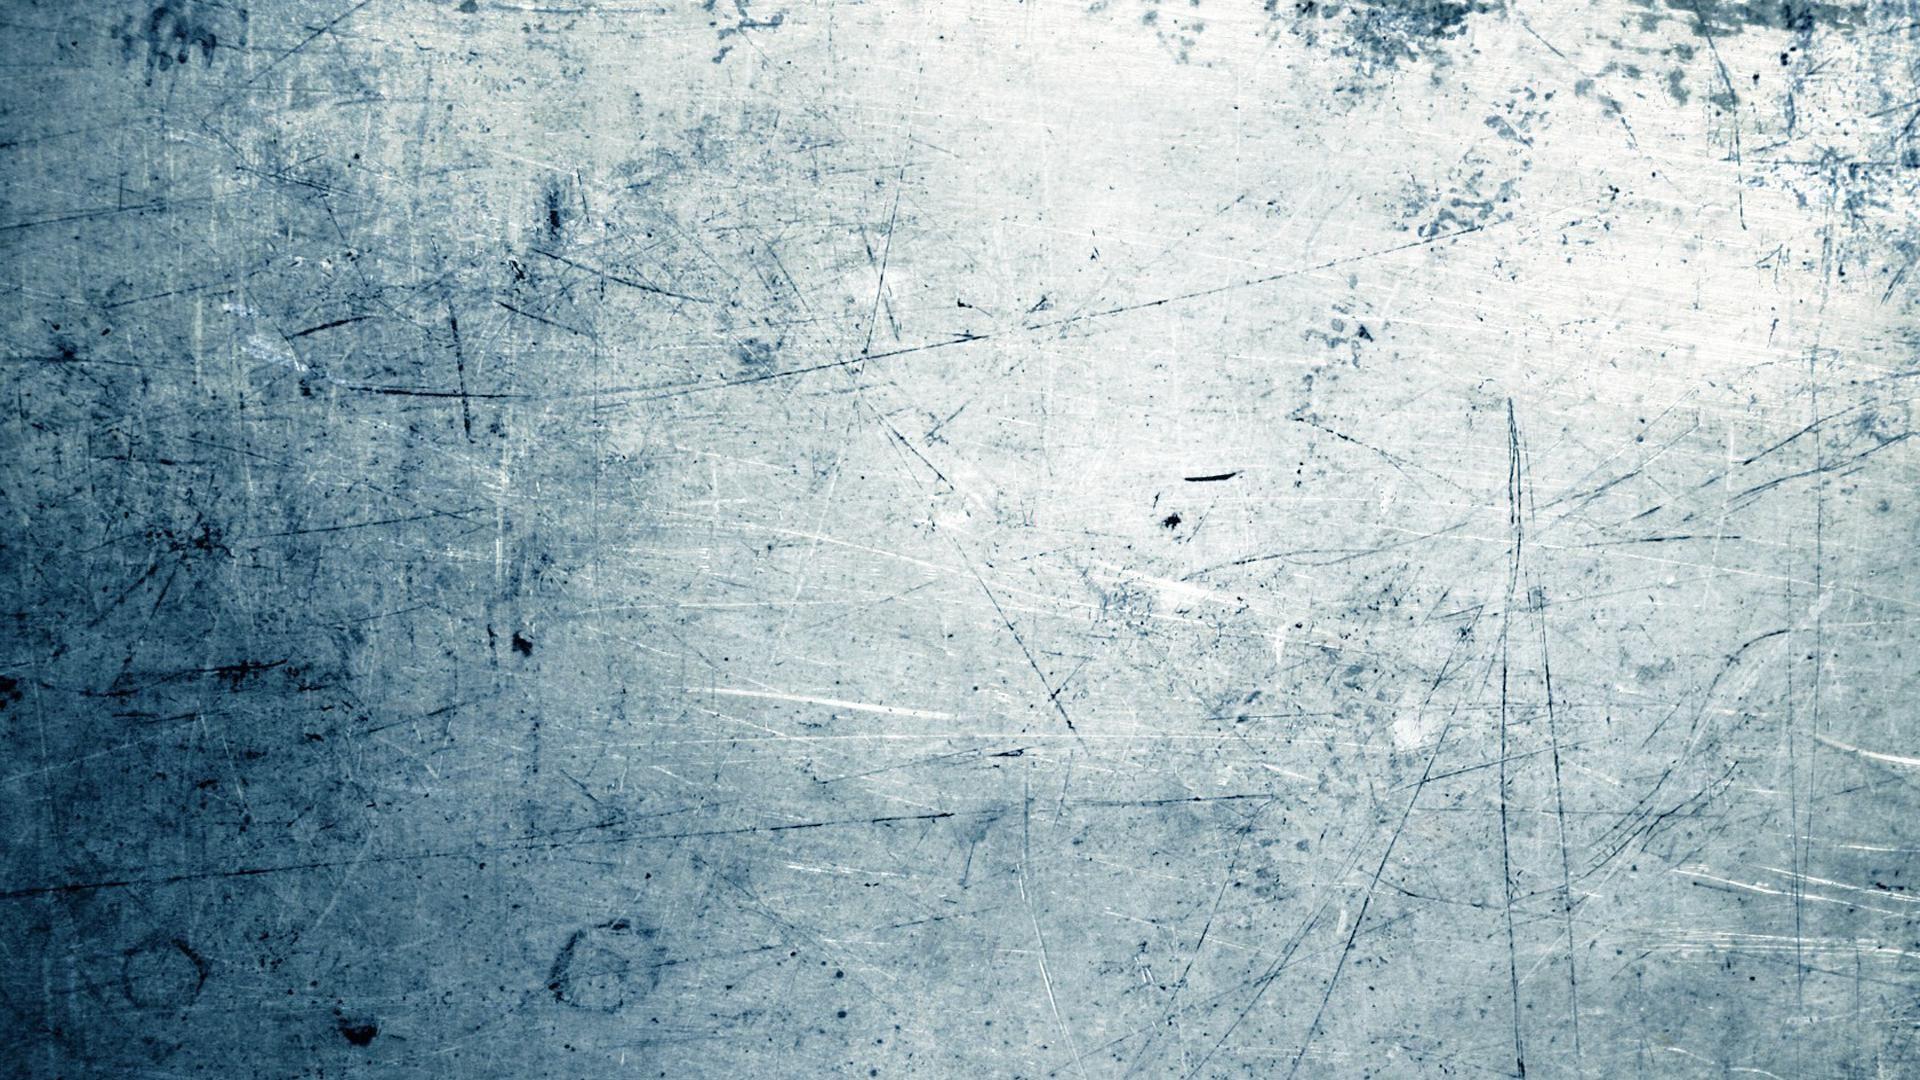 HD Grunge Wallpaper Texture Free. Abstract wallpaper, Grunge textures, Abstract